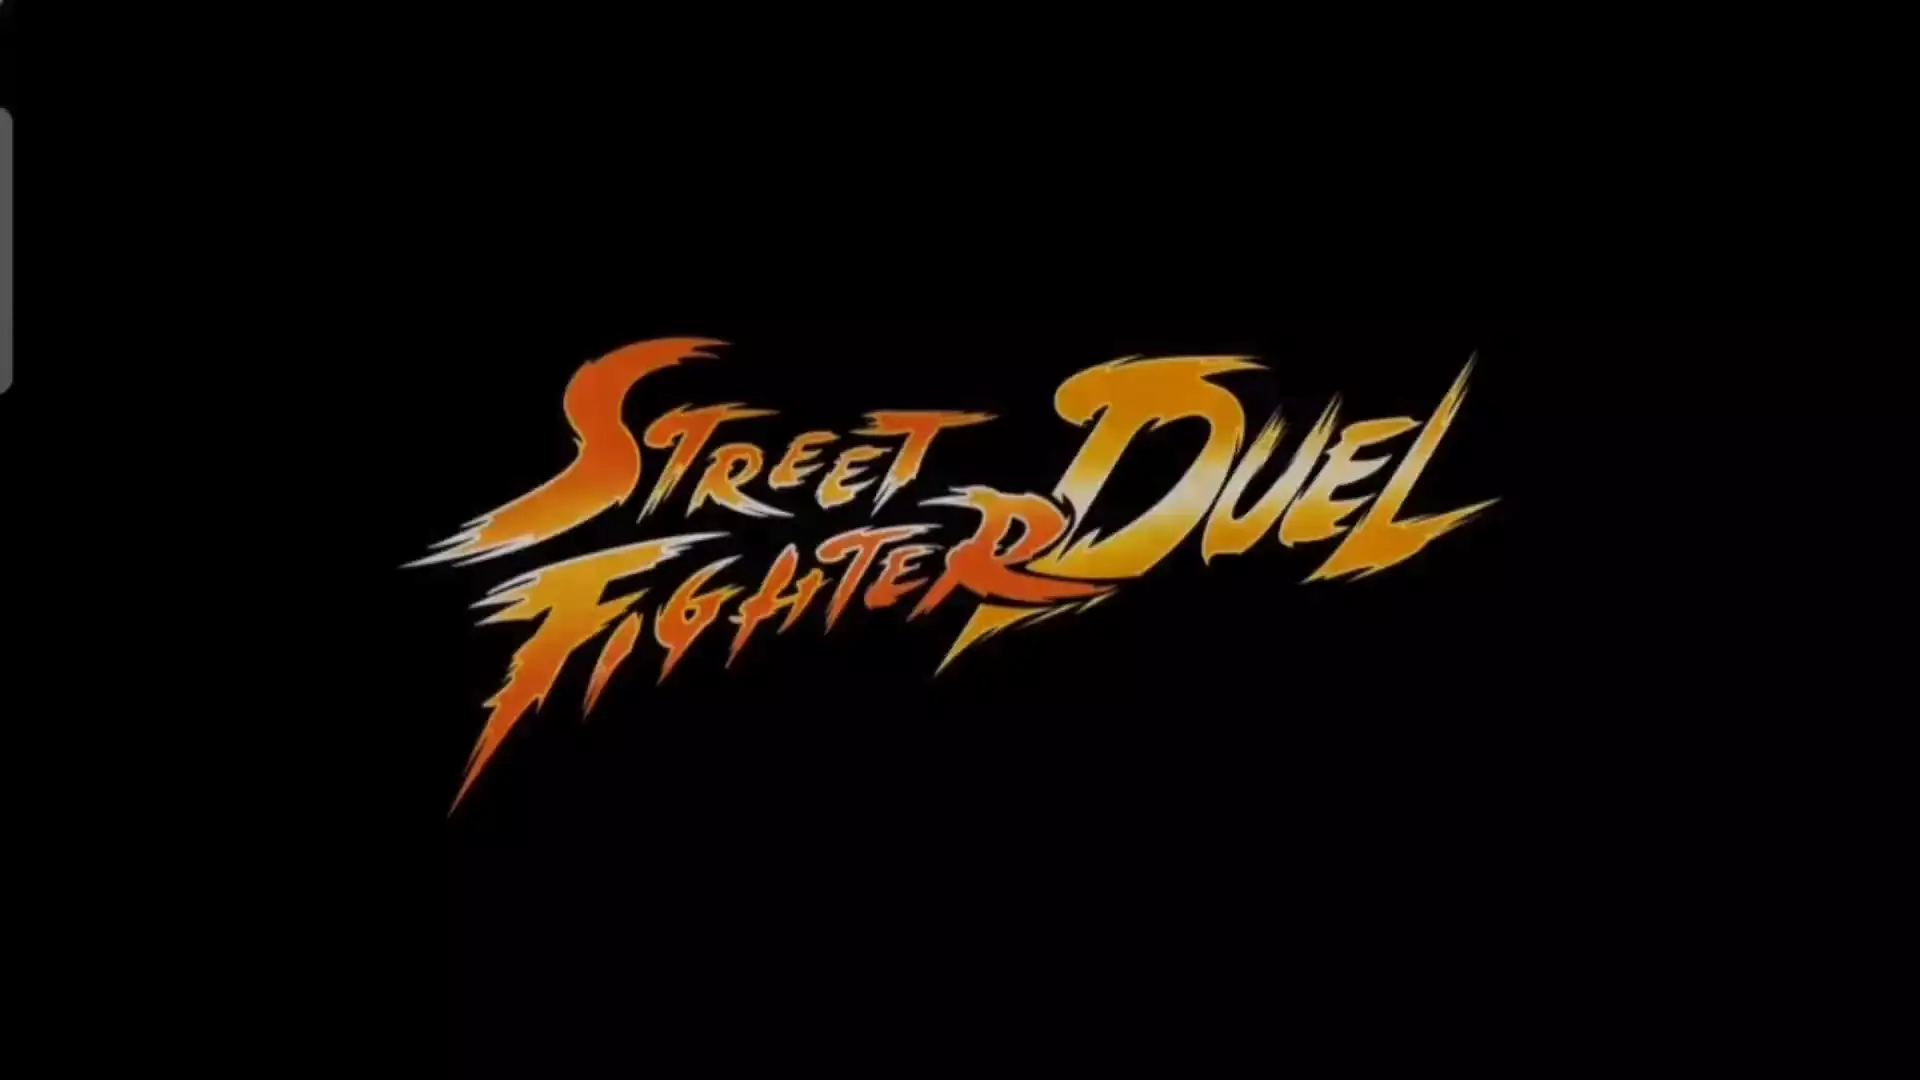 Picture Street fighter duel